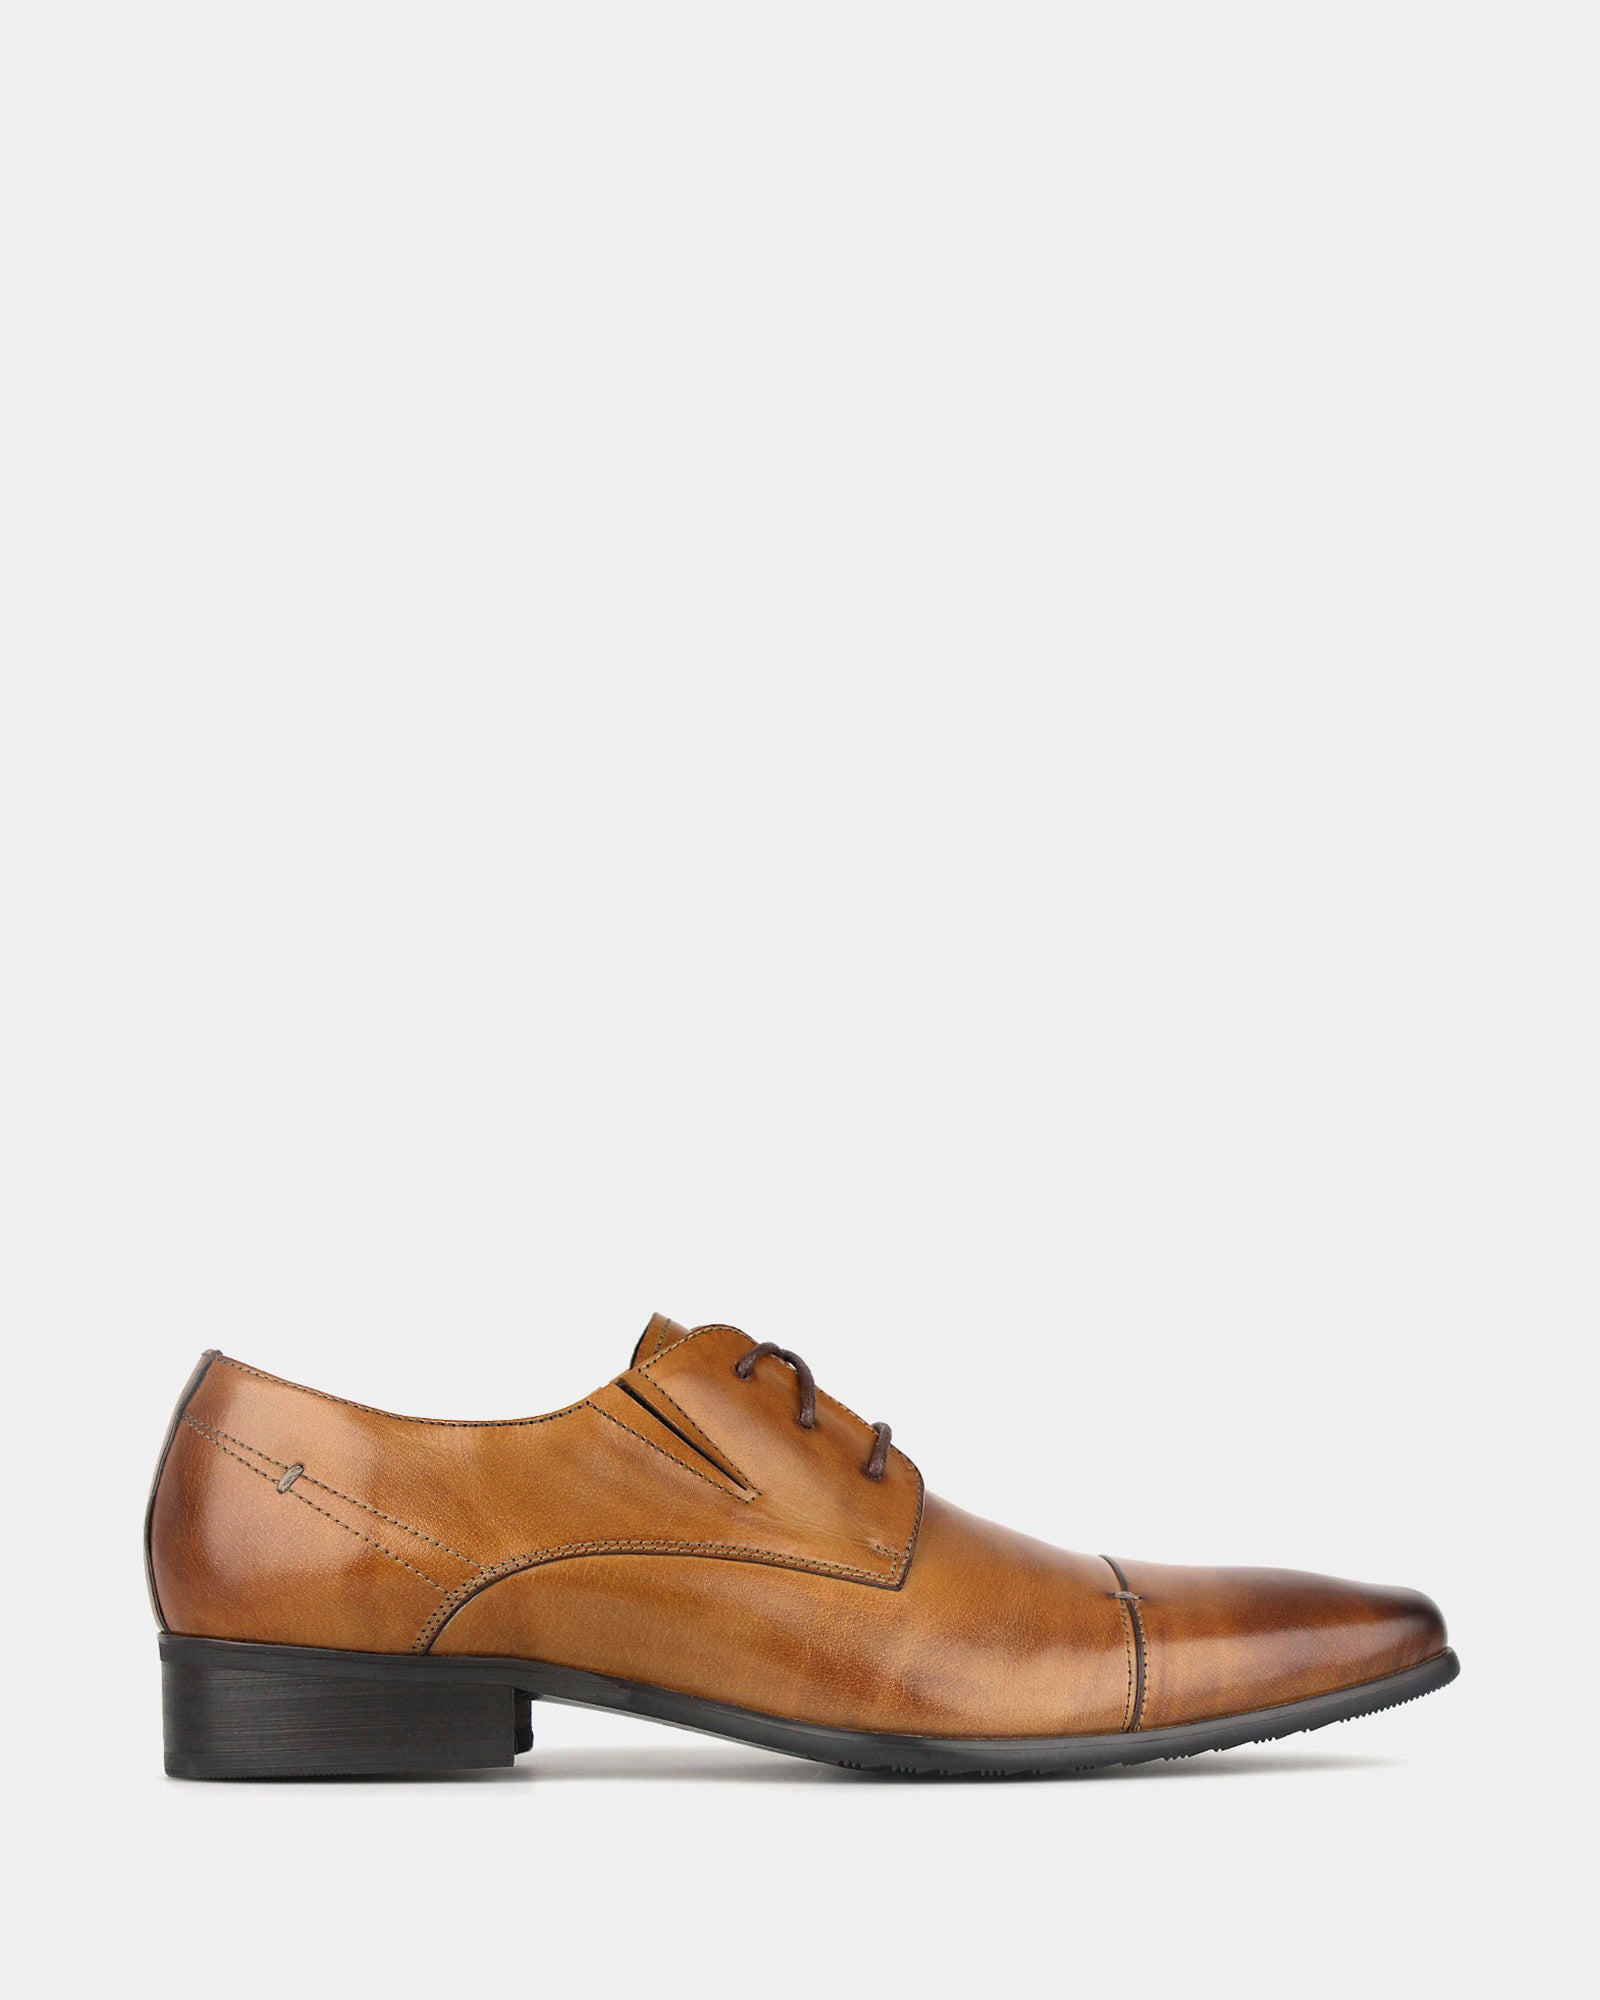 Buy DEFIANT Leather Dress Shoes by Airflex online - Betts